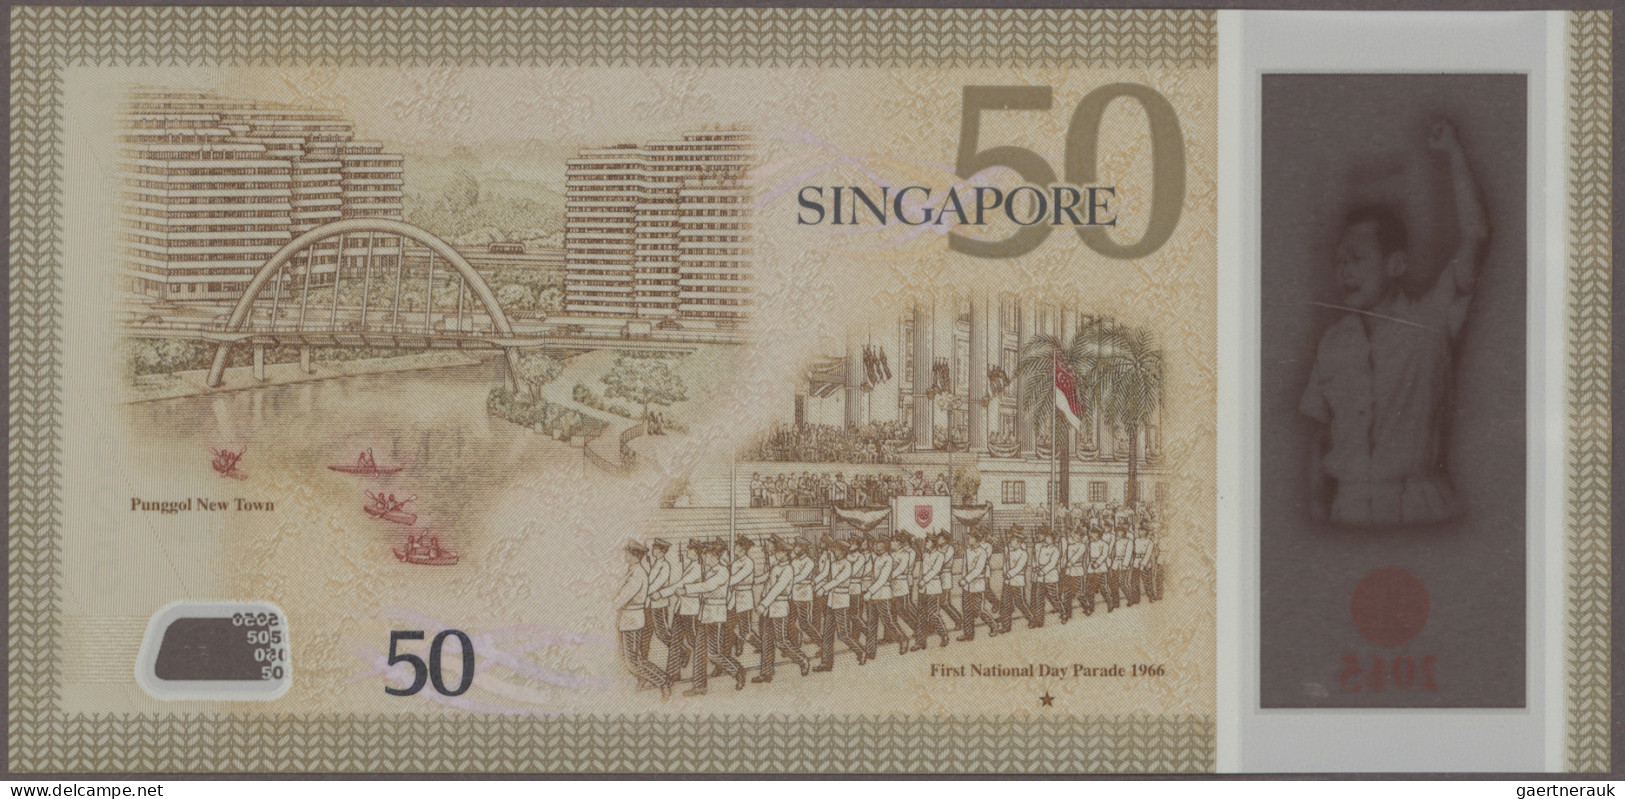 Singapore: Board Of Commissioners Of Currency And Monetary Authority Of Singapor - Singapore